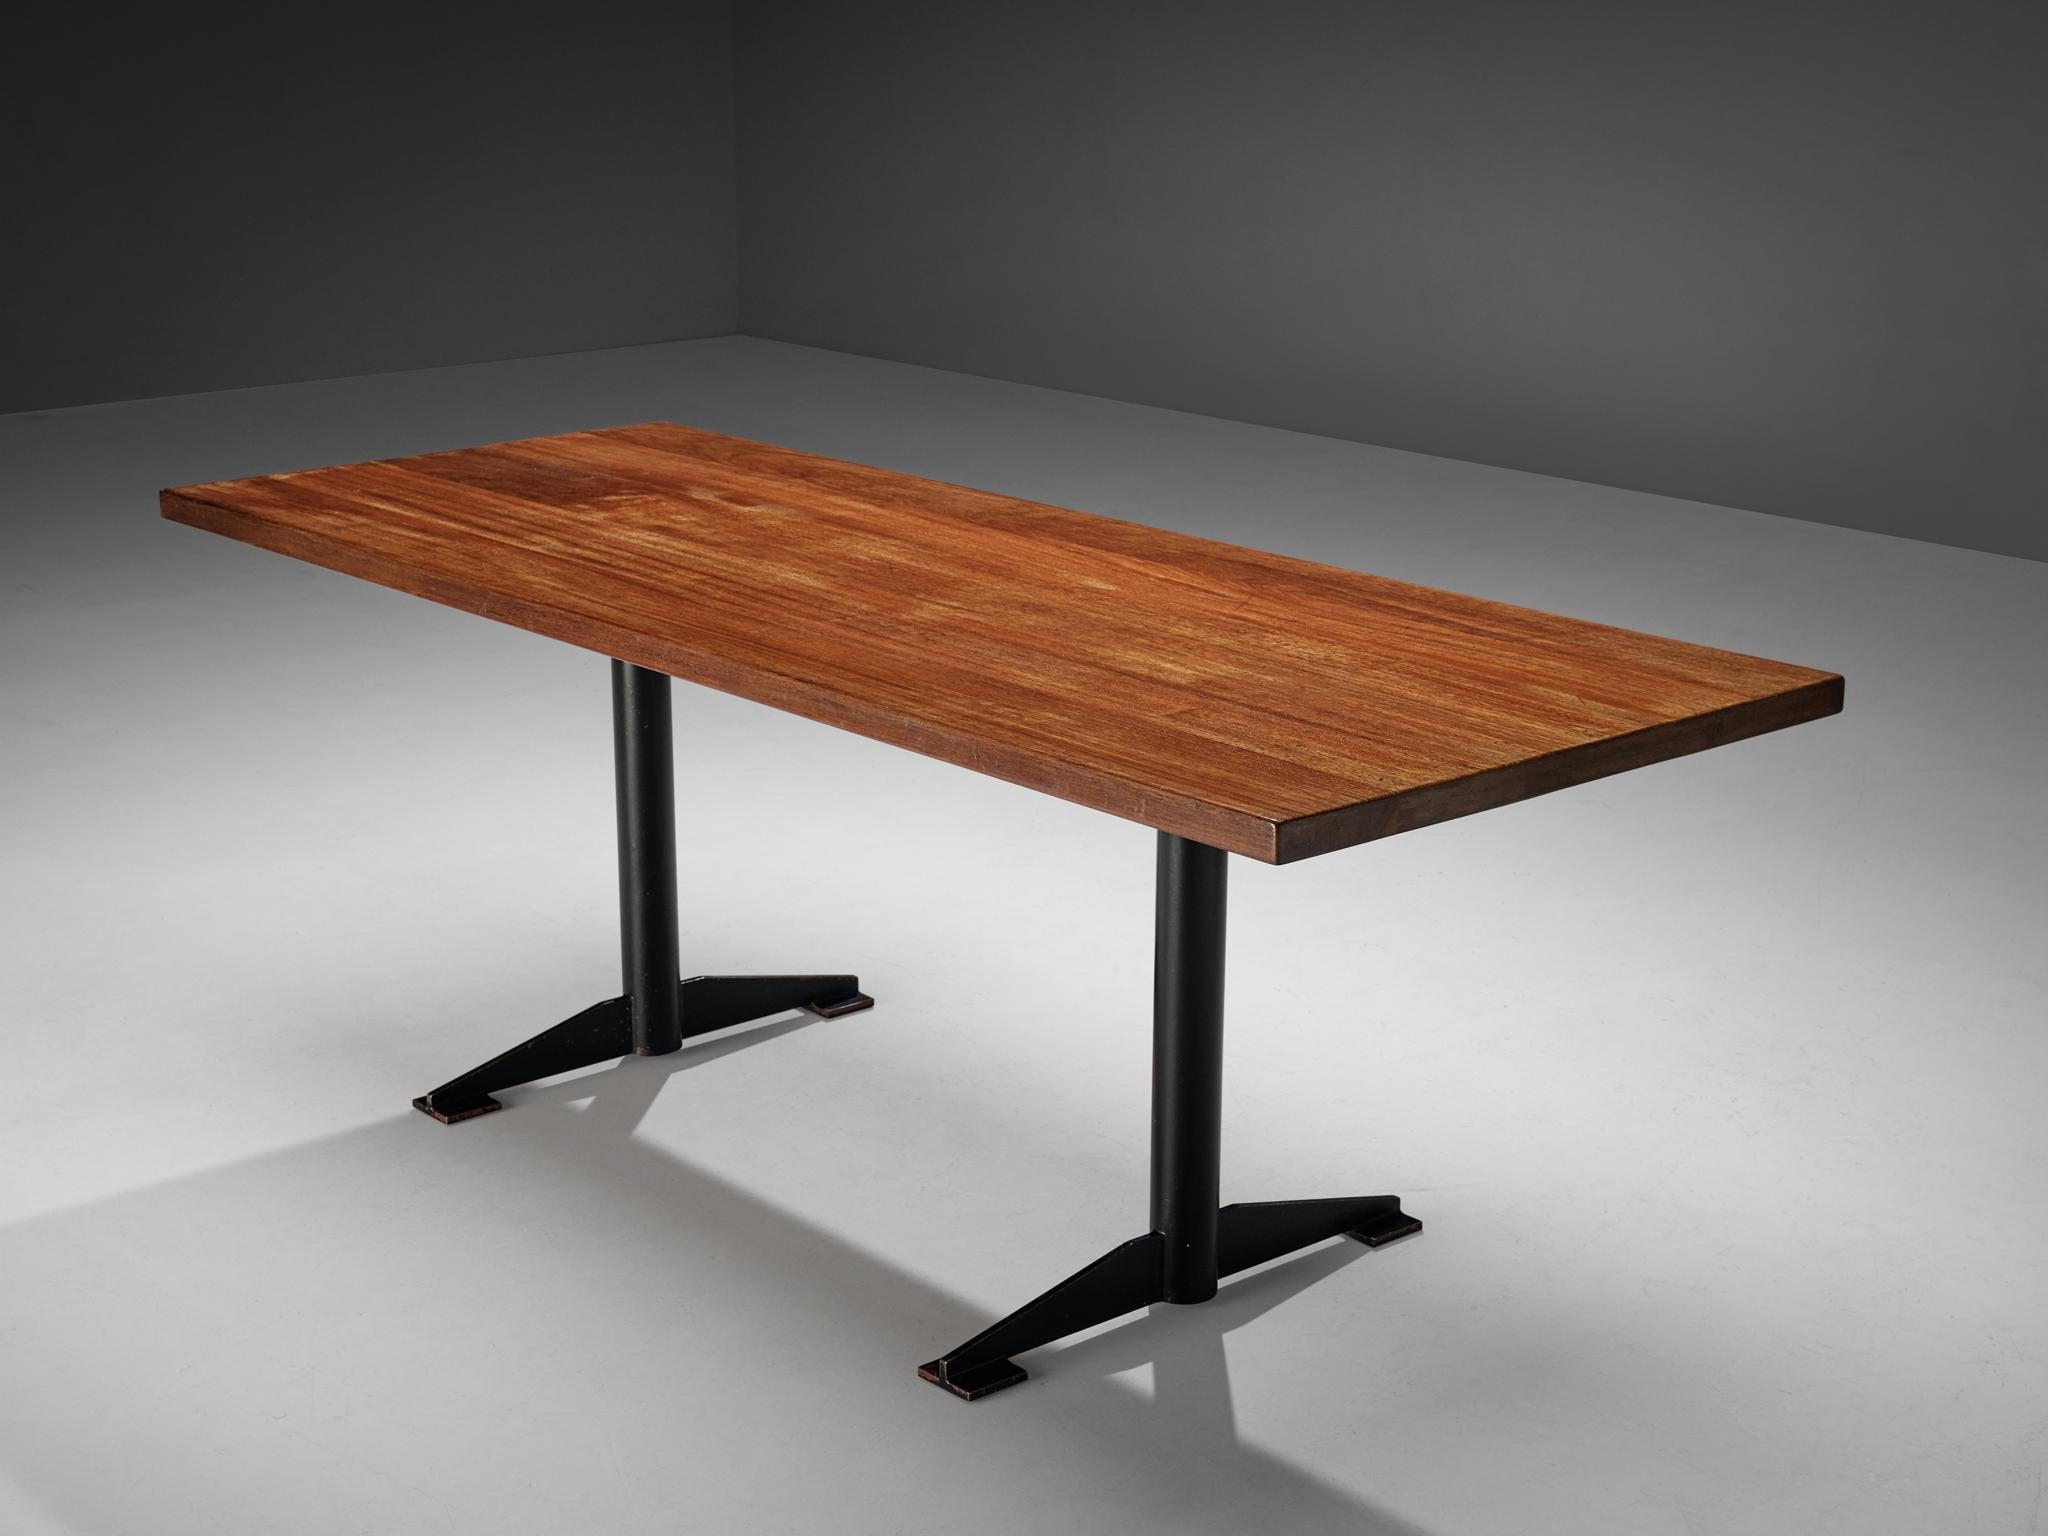 Wim den Boon, dining table, mahogany, lacquered steel, The Netherlands, designed in 1955 and manufactured in 1958. 

Exclusive dining table designed by Wim den Boon for a Dutch family home, and therefore one of a kind. This honest design features a